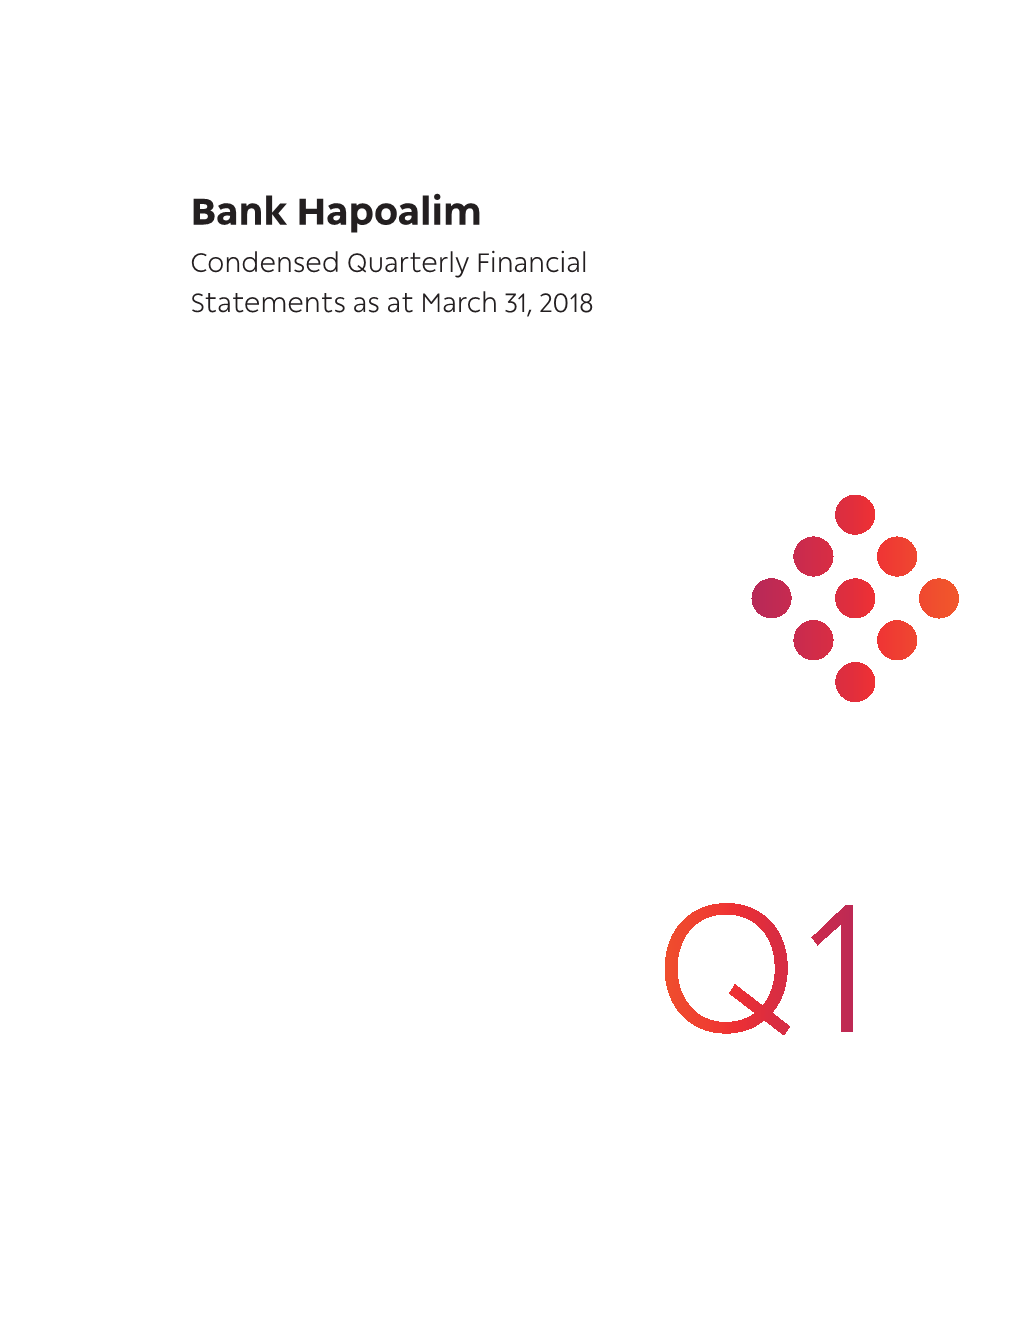 Bank Hapoalim Condensed Quarterly Financial Statements As at March 31, 2018